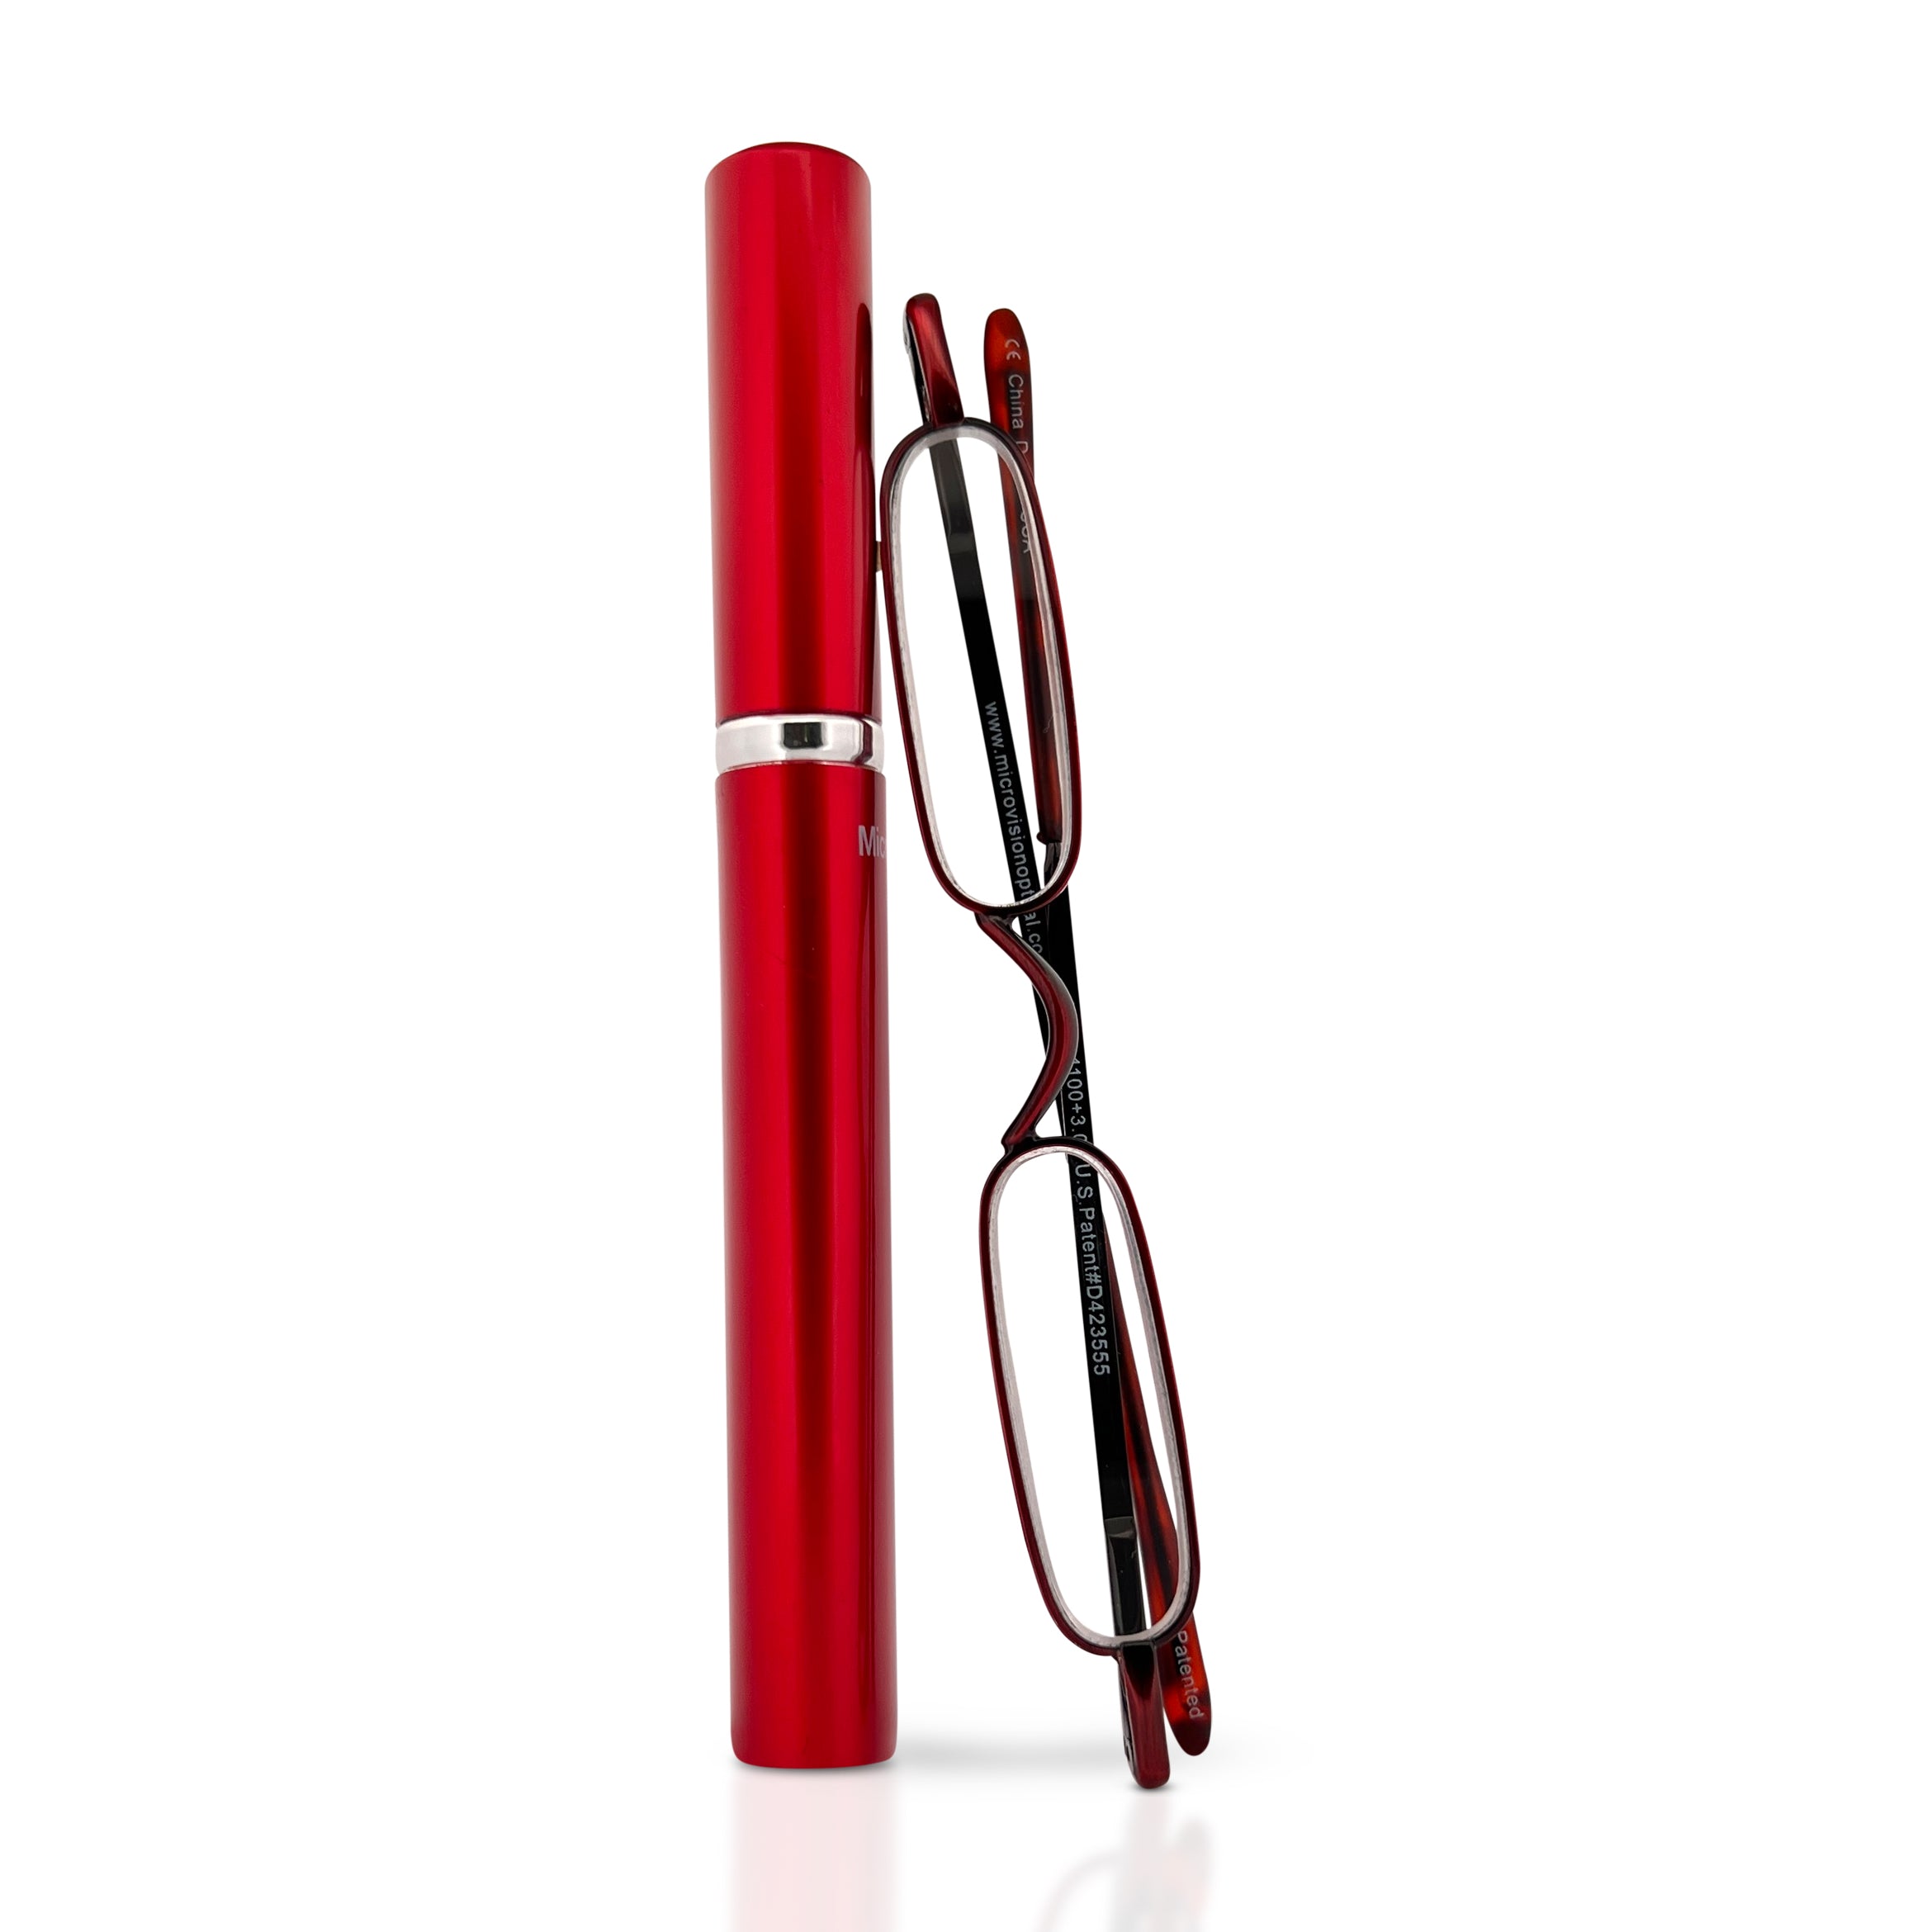 Red sleek, compact, patented, stainless steel, original mini readers perfect for on the go